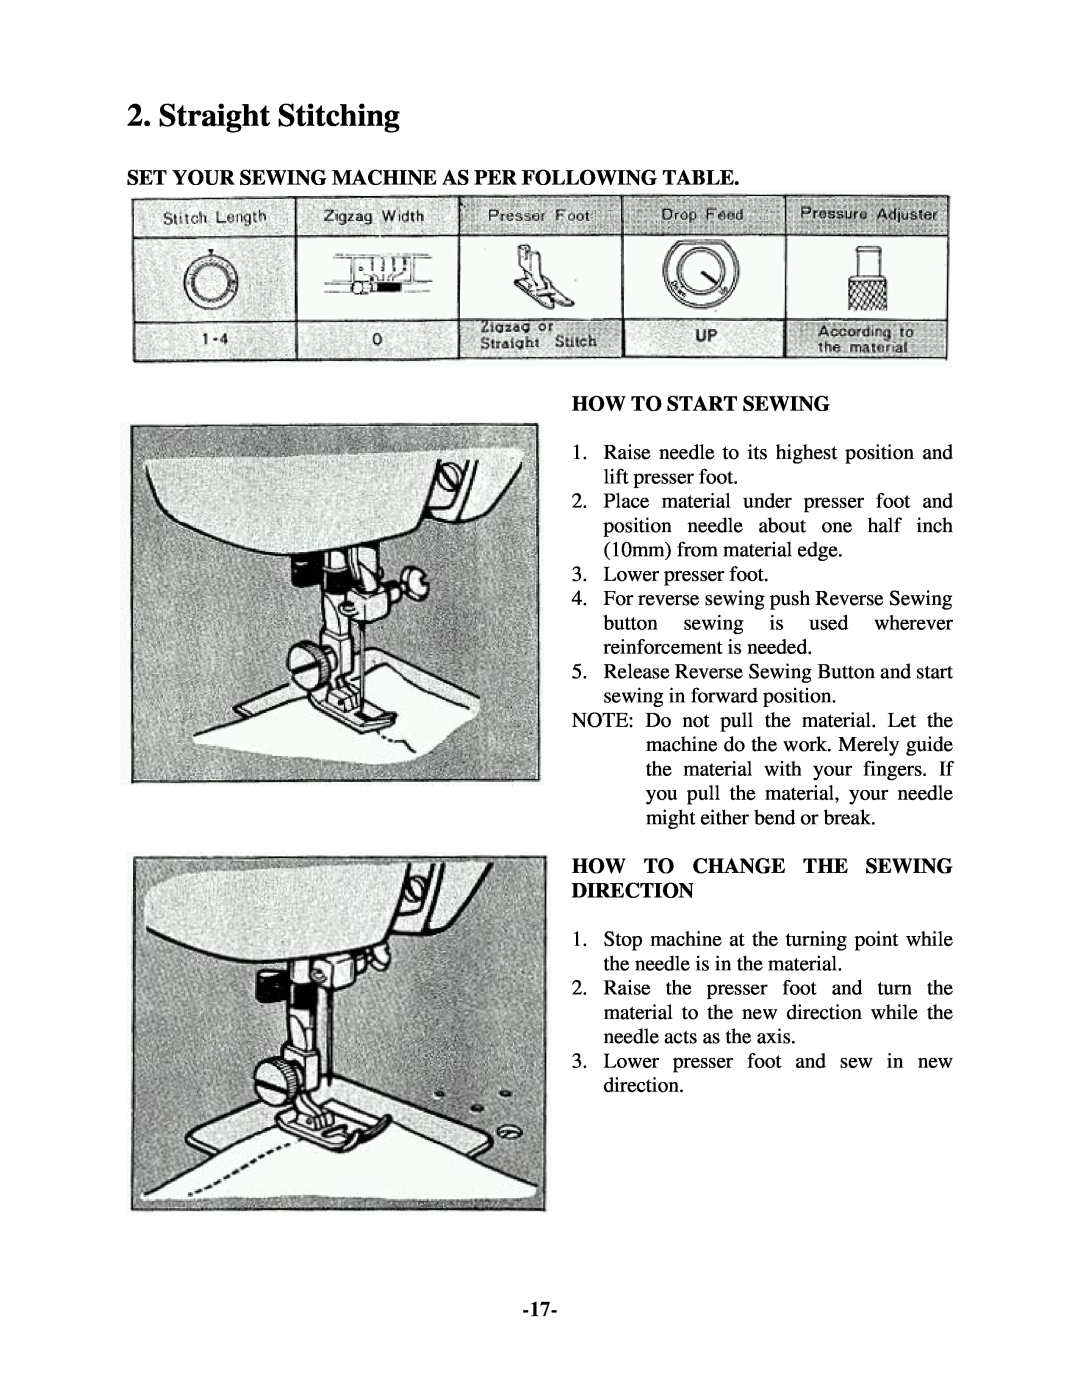 Brother 681B-UG manual Straight Stitching, Set Your Sewing Machine As Per Following Table How To Start Sewing 